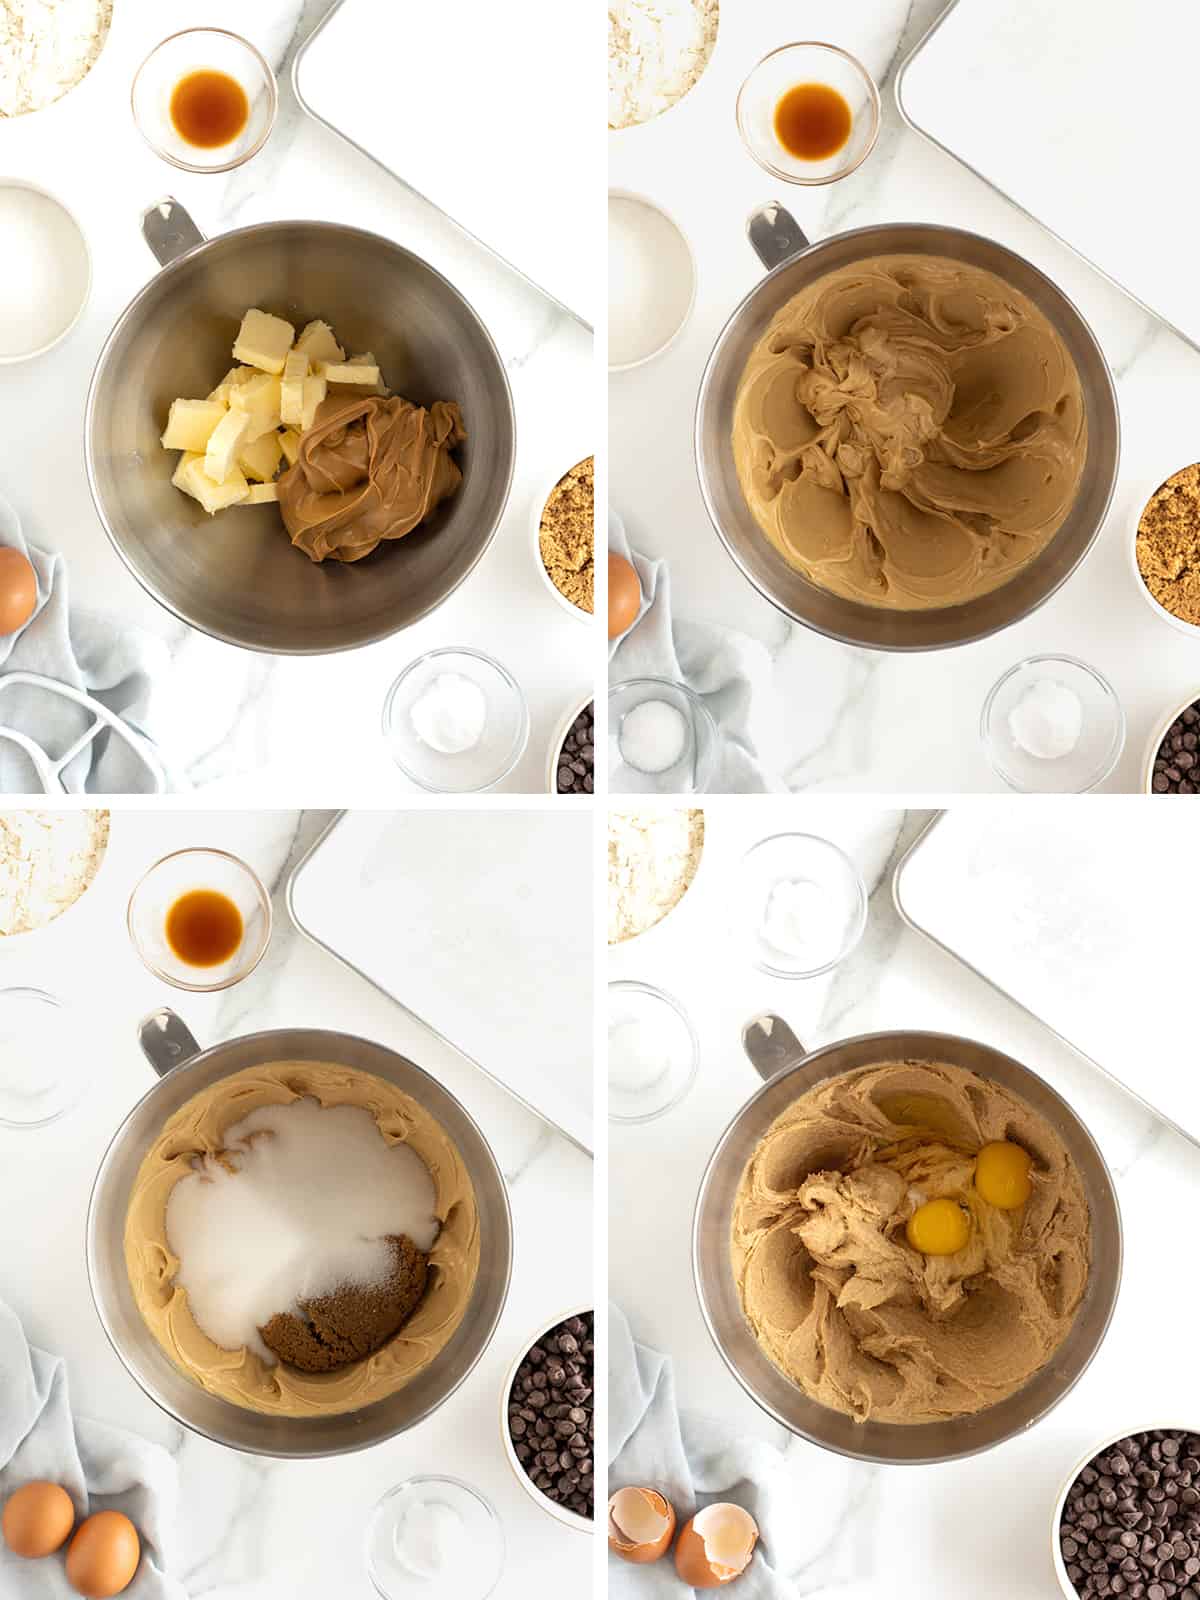 Steps to make peanut butter chocolate chip cookie dough.